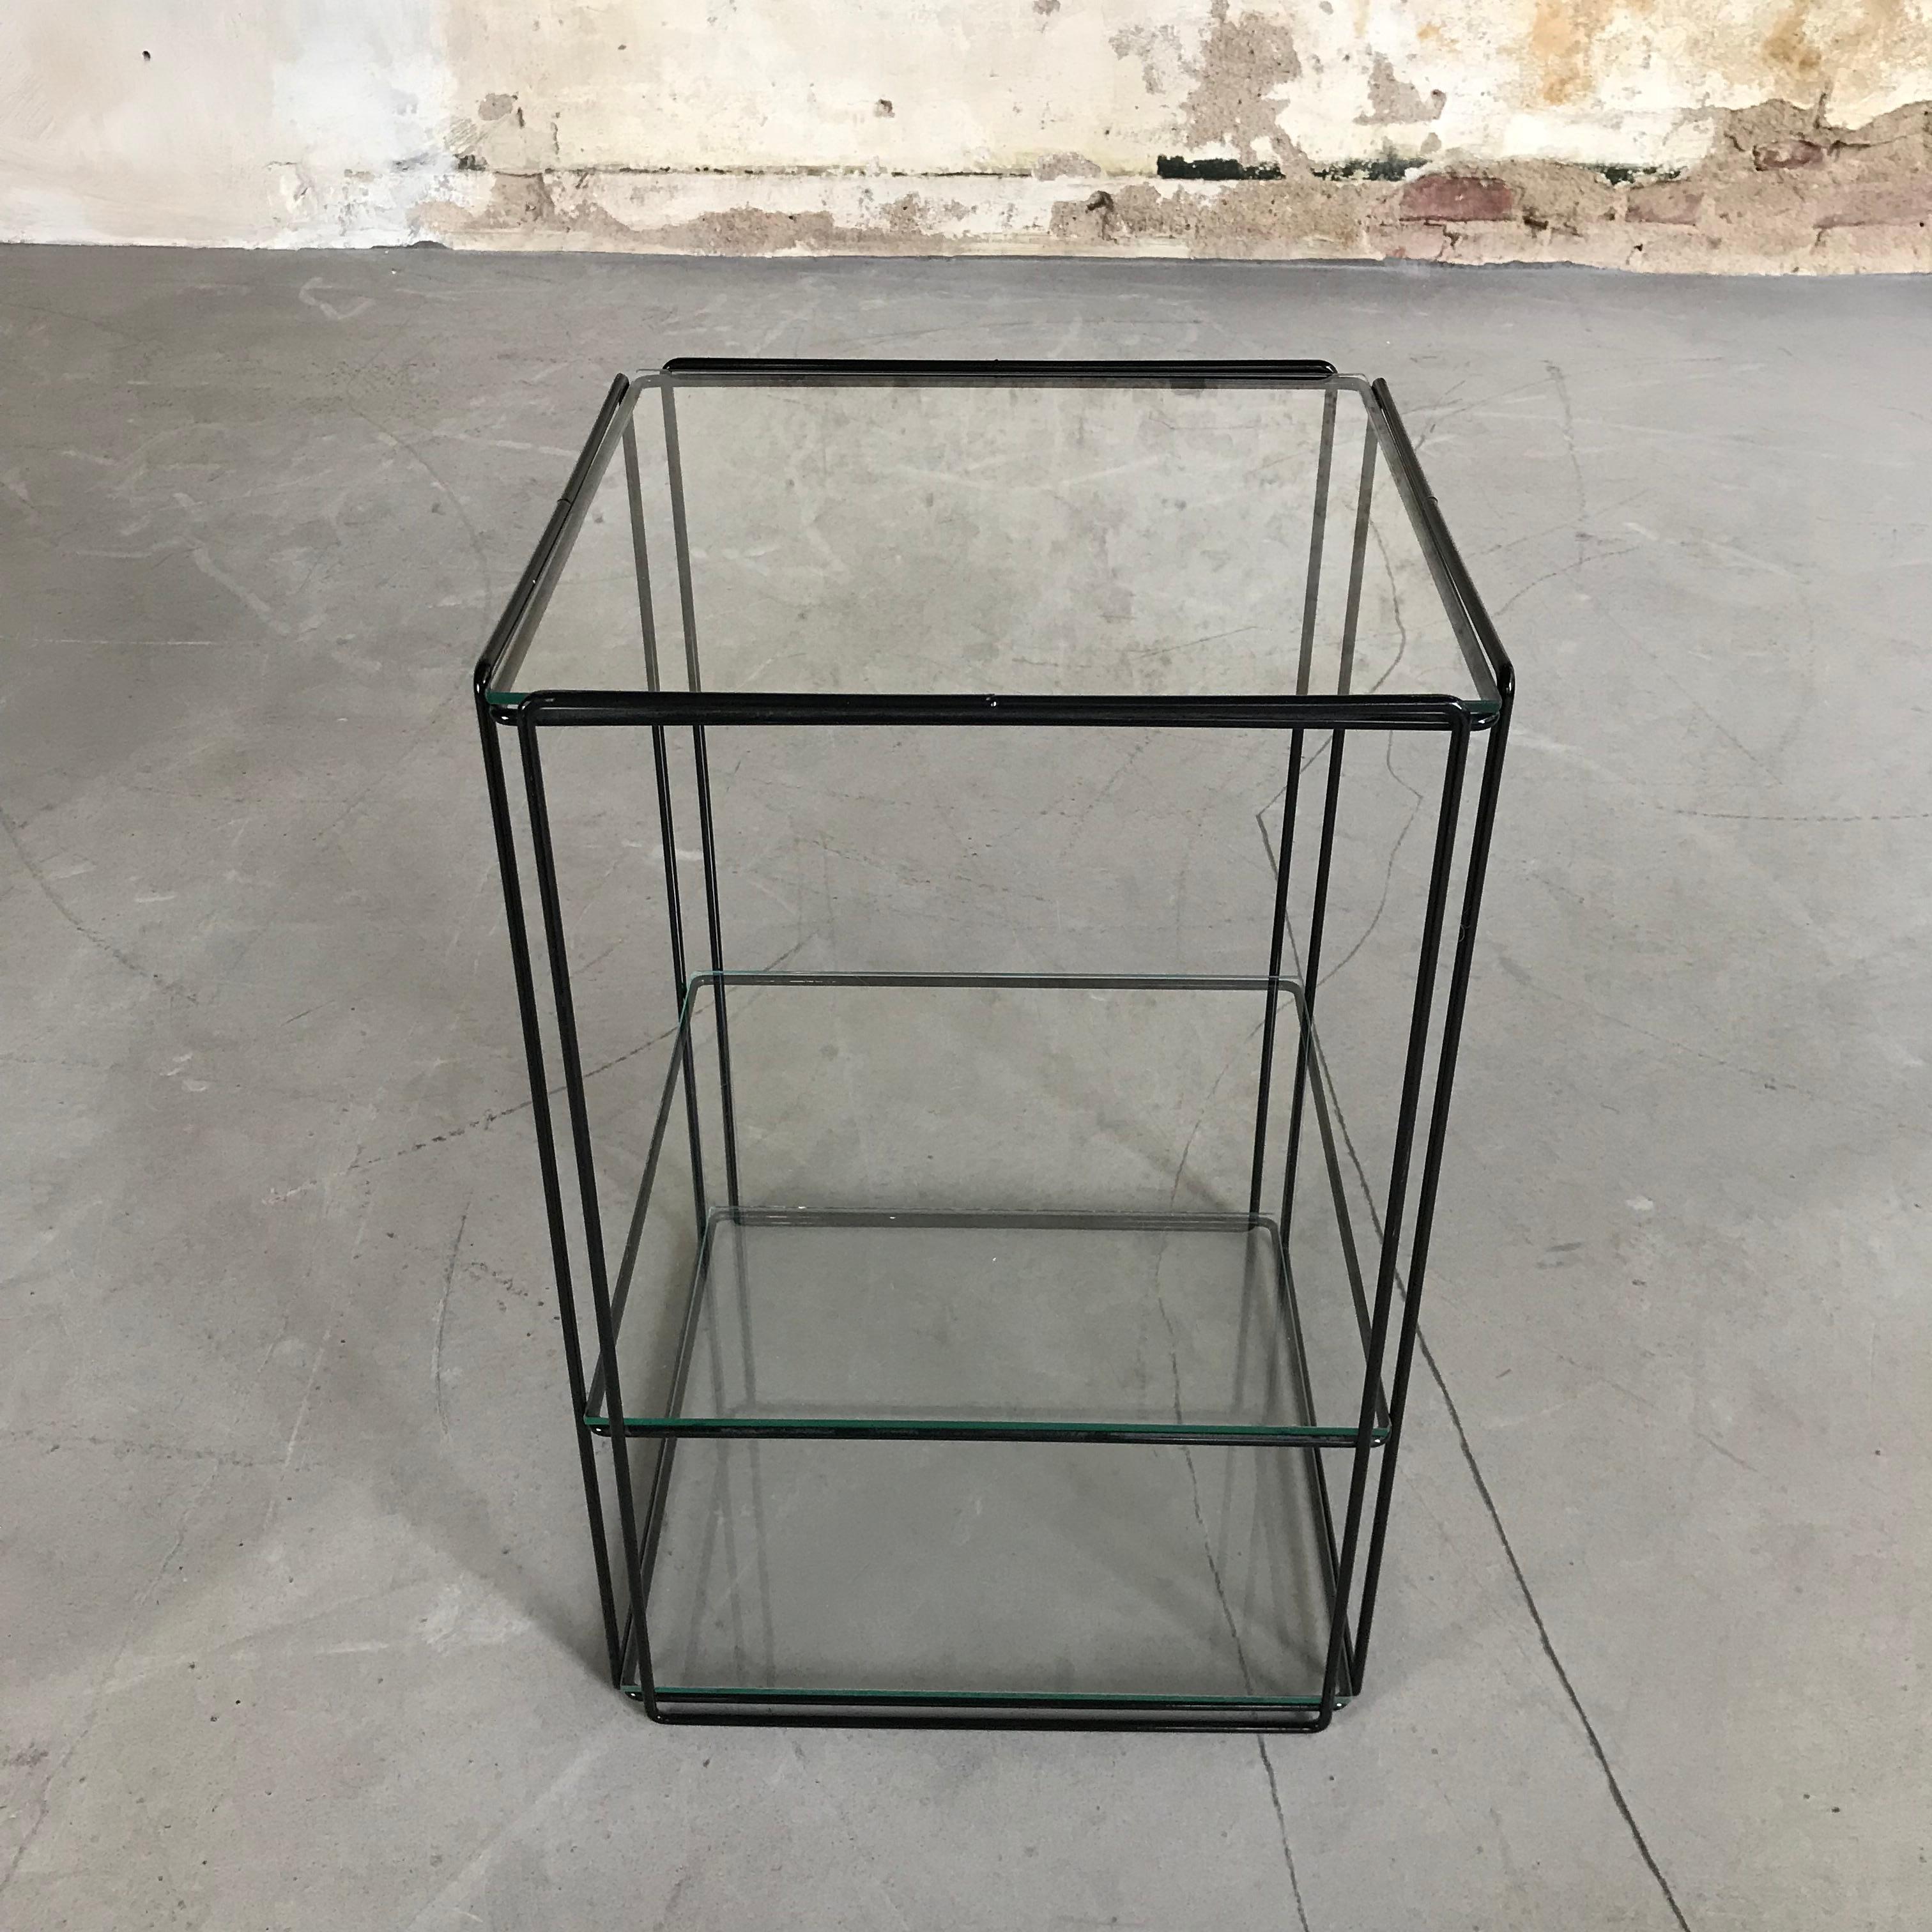 Beautiful, graphical and Minimalist design by Max Sauze for Max Sauze Studio or Atrow, circa 1970. This table features a black colored metal base and three glass 'shelves'. The glass and metal wire structure gives this table a very transparent,